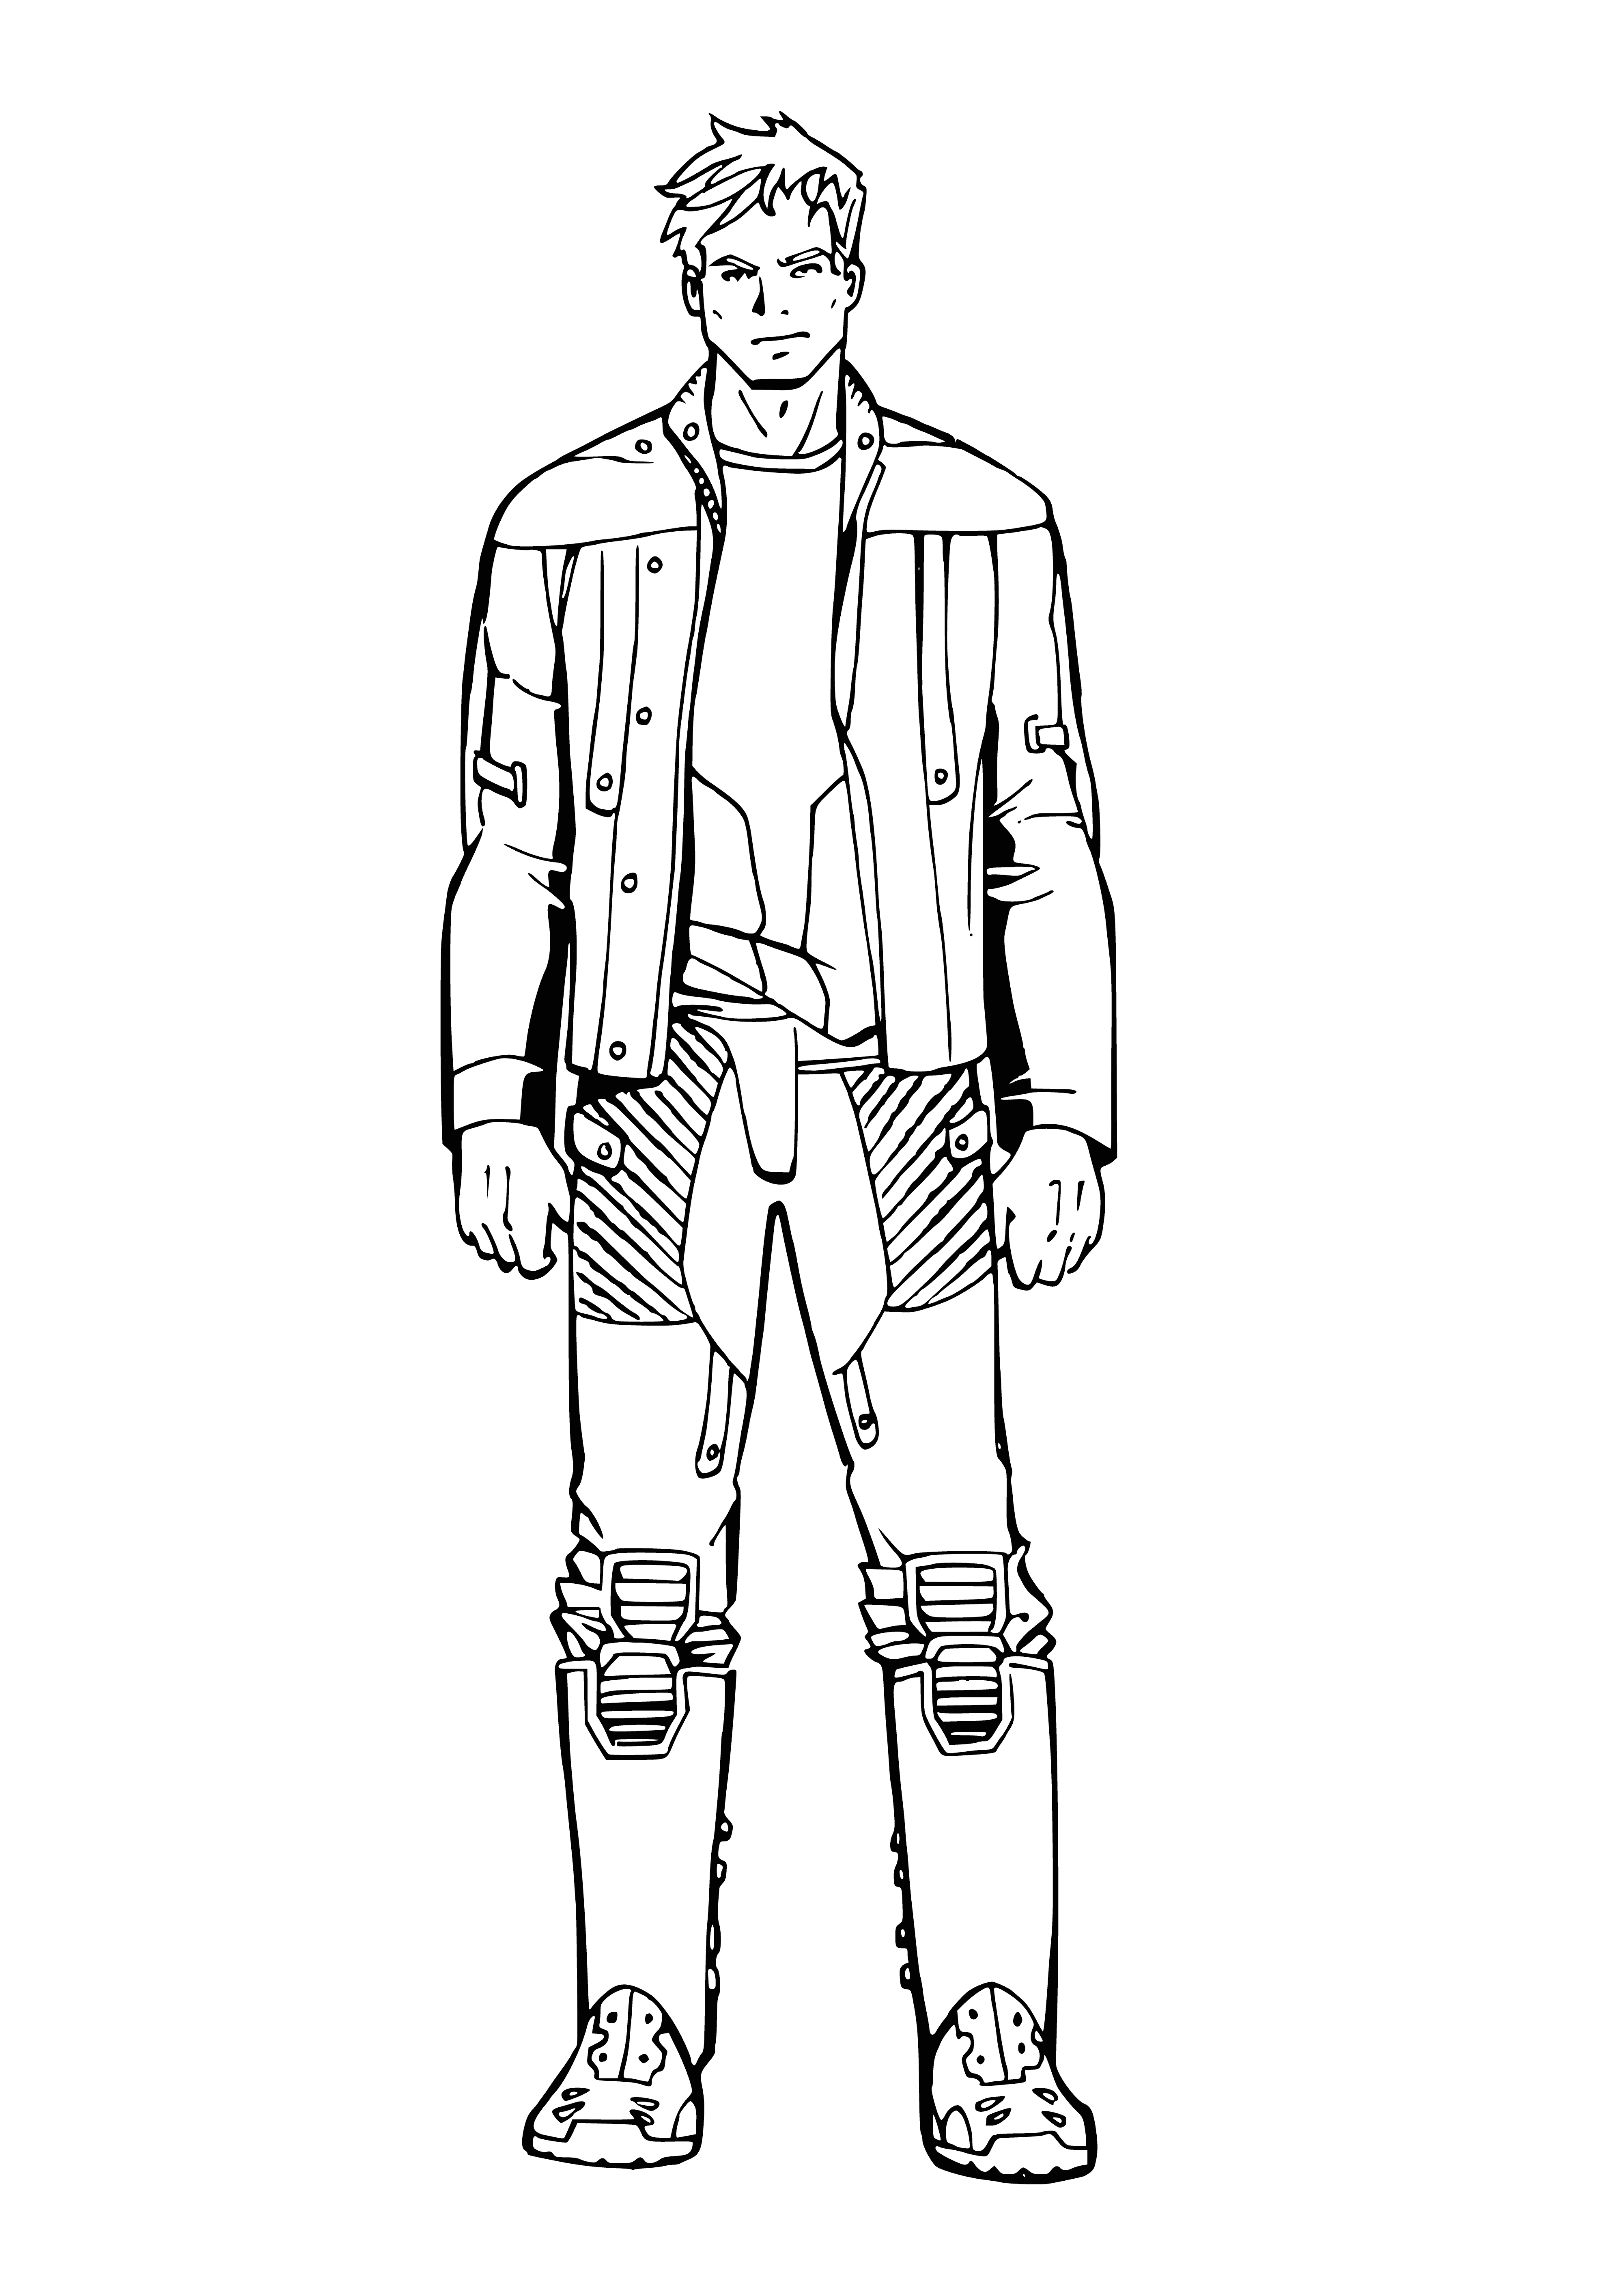 coloring page: Man in blue space suit prepares for battle, armed with blaster rifle and helmet. Determined look on his face.